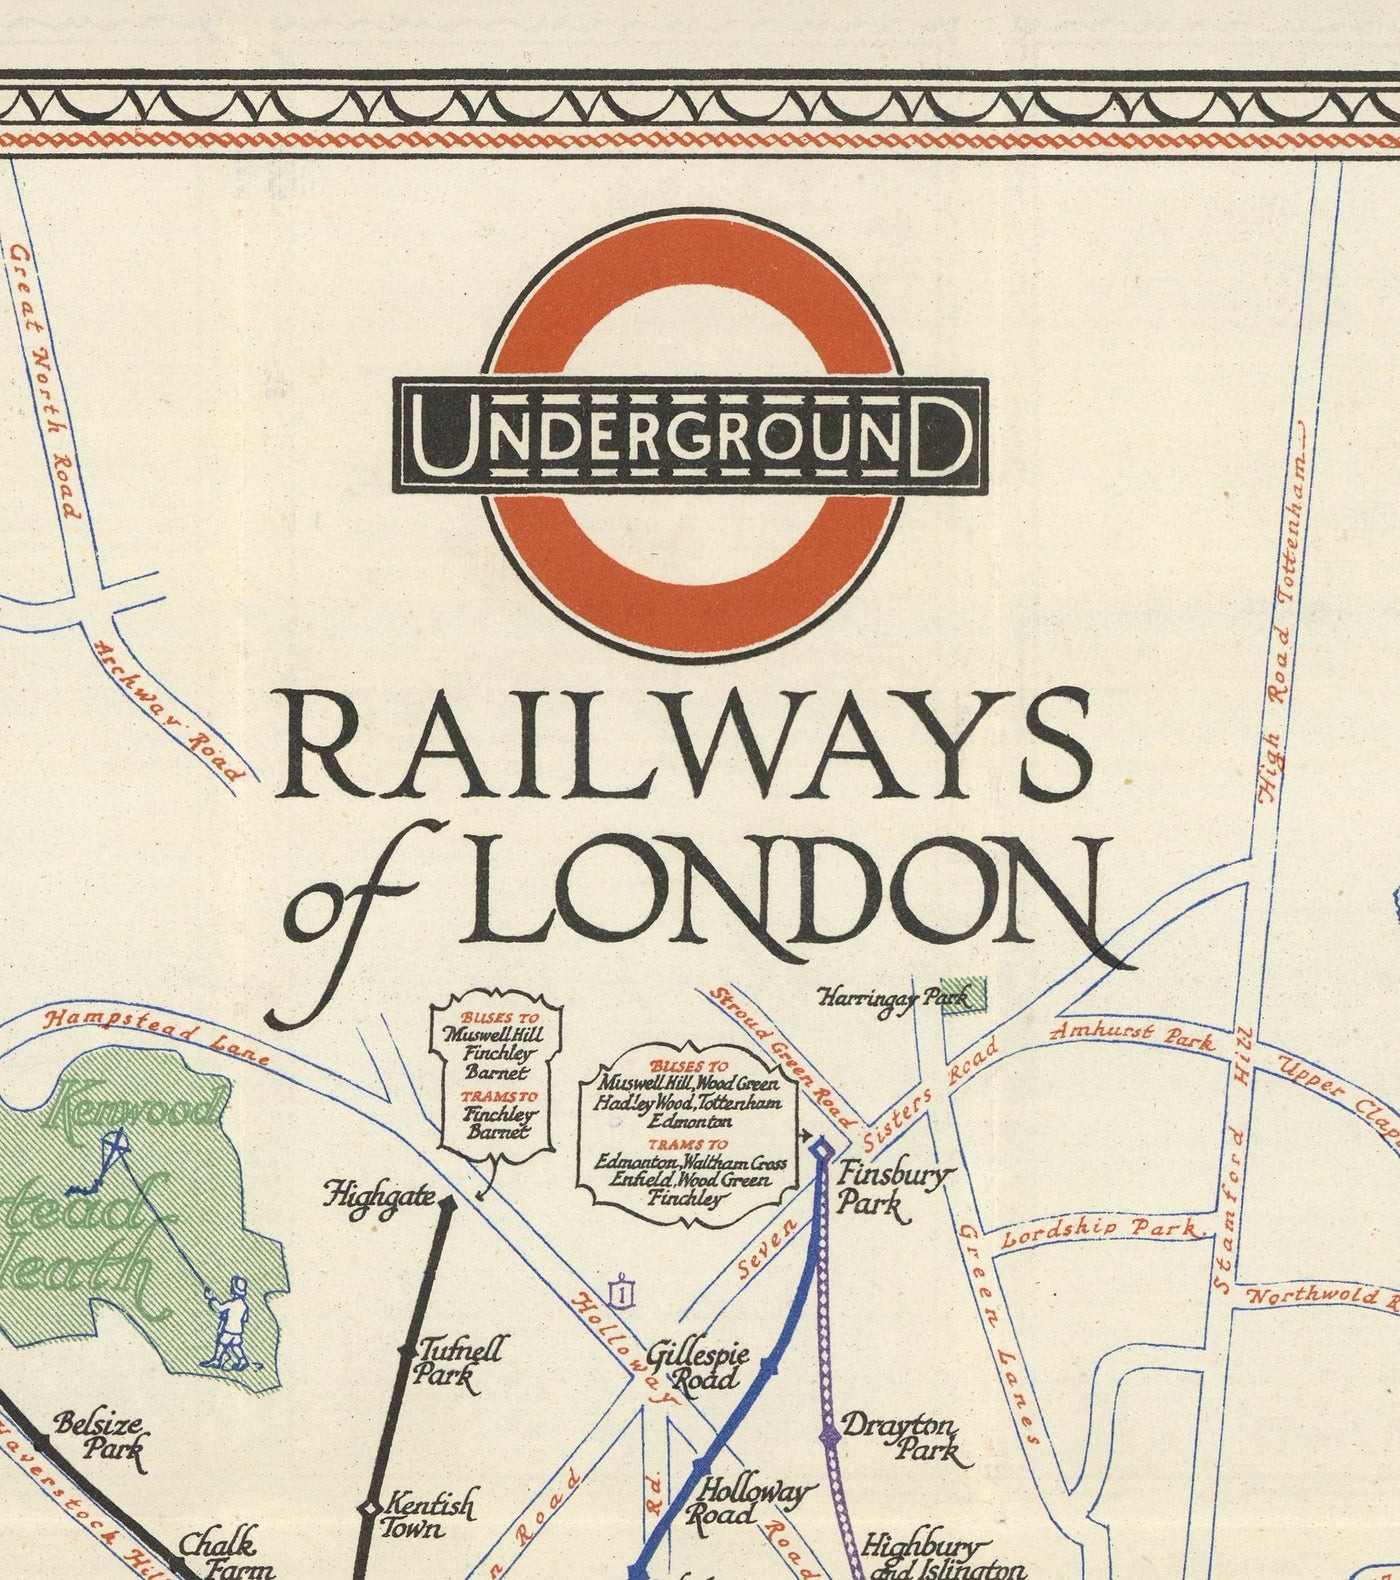 Rare Old London Underground Tube Map, 1928 - Covent Garden, Piccadilly Circus, Central & District Line